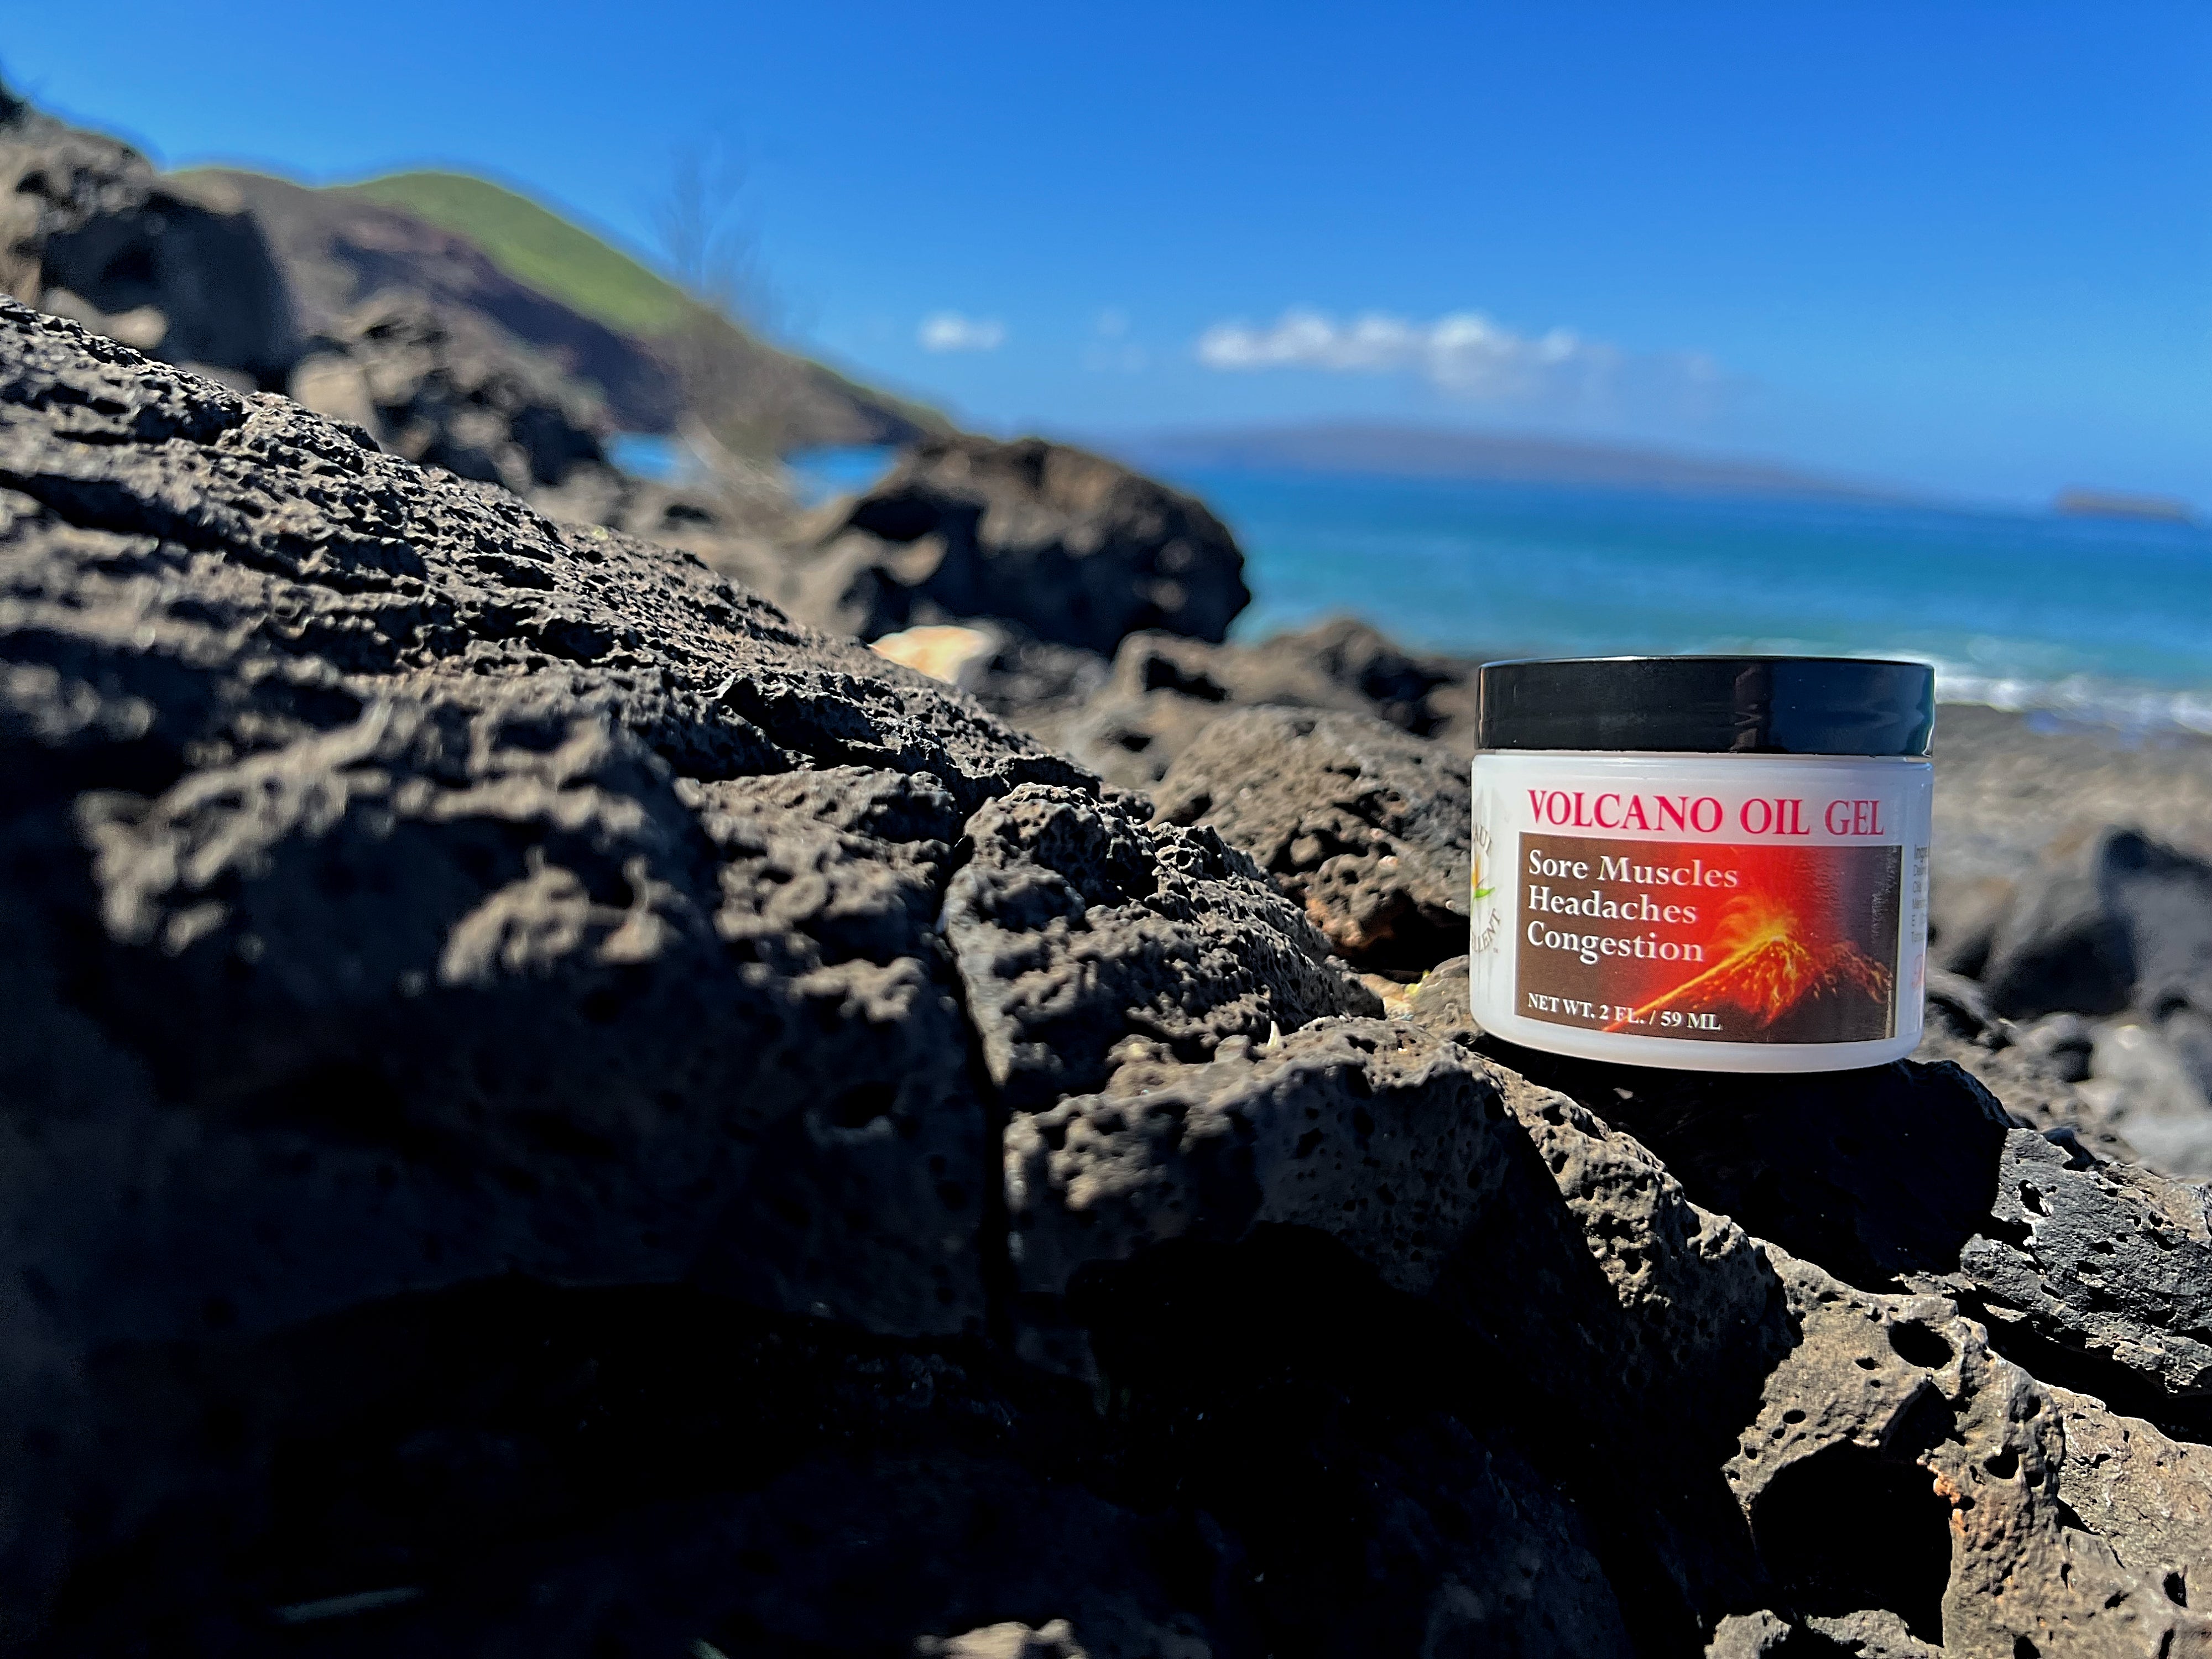 Maui Excellent Volcano Oil Gel atop gray beach rocks. Blue sky, ocean, the Hawaiian Island Kahoolawe, and the Molokini Crater in the distant background.